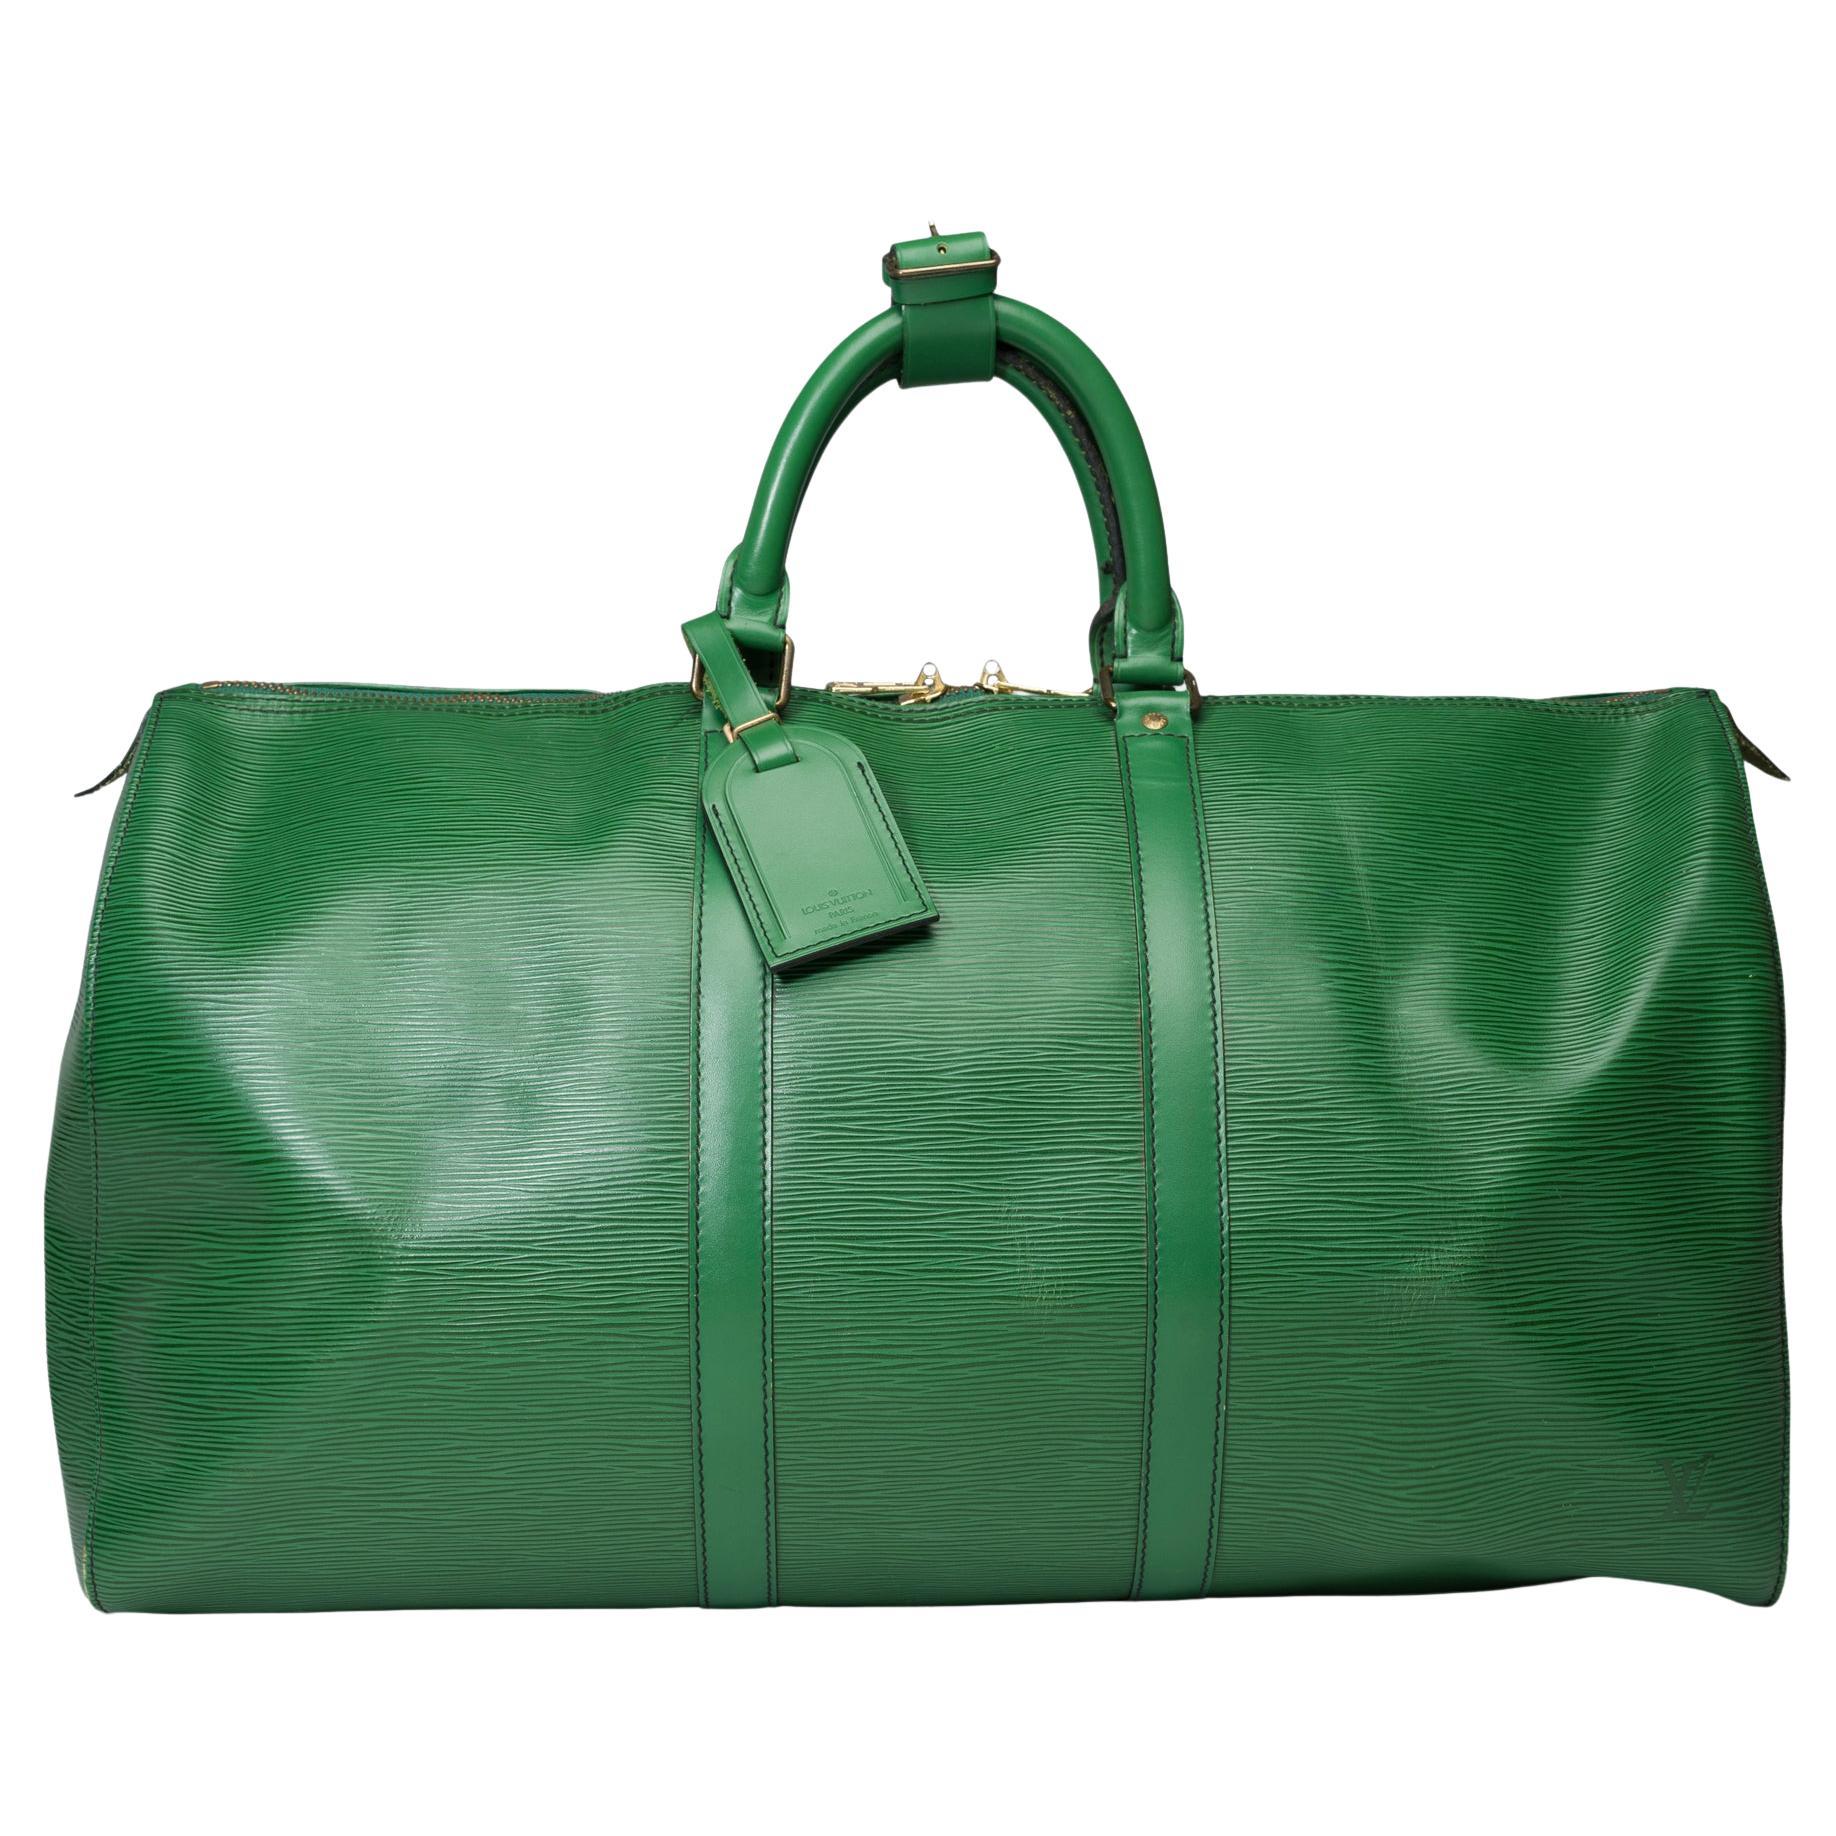 Louis Vuitton Keepall 50 Travel bag in Green épi leather, GHW For Sale